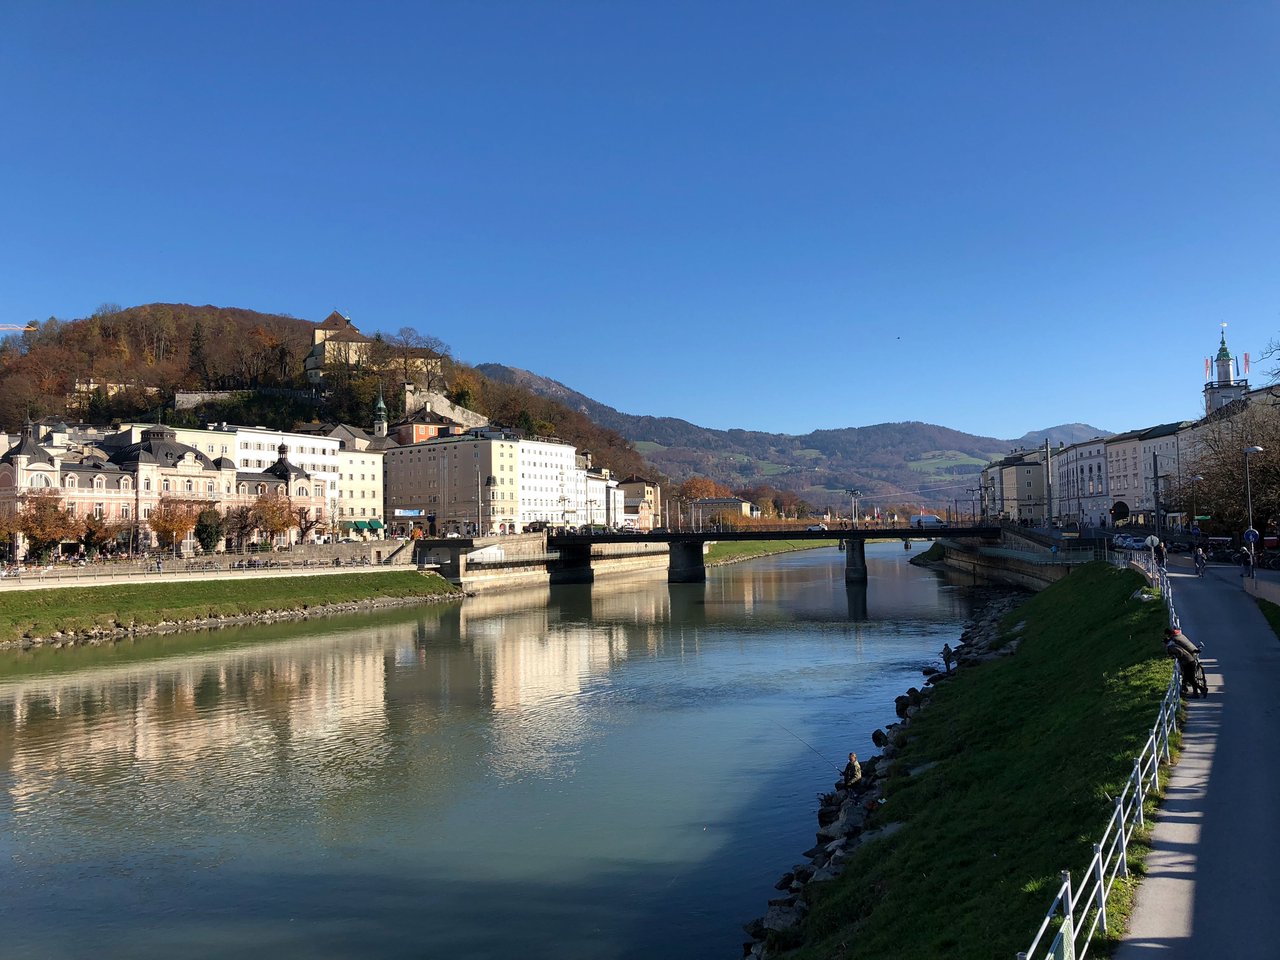  A view of Salzach River 